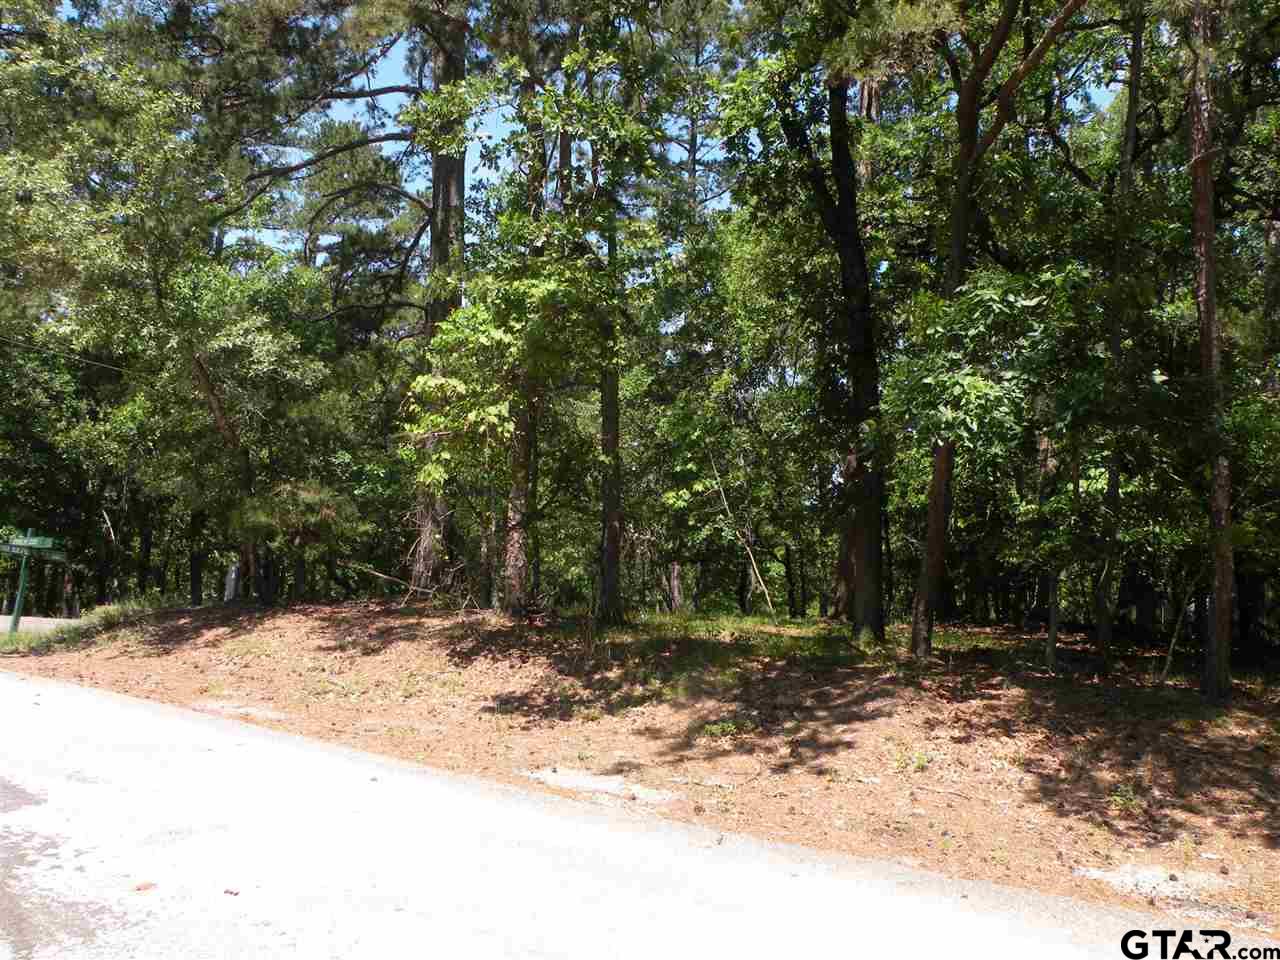 Wonderful corner lot to build a house or weekend home.  The lot is fairly secluded so it doesn't have a lot of traffic.  Holly Lake Ranch is a gated community with an 18 hole golf course, swimming pools, tennis courts, fitness center and many other amenities.  Feel safe with a 24 hour security that monitors the entire area. This area of Holly Lake Ranch is wooded which will allow you to enjoy peaceful days with nature.